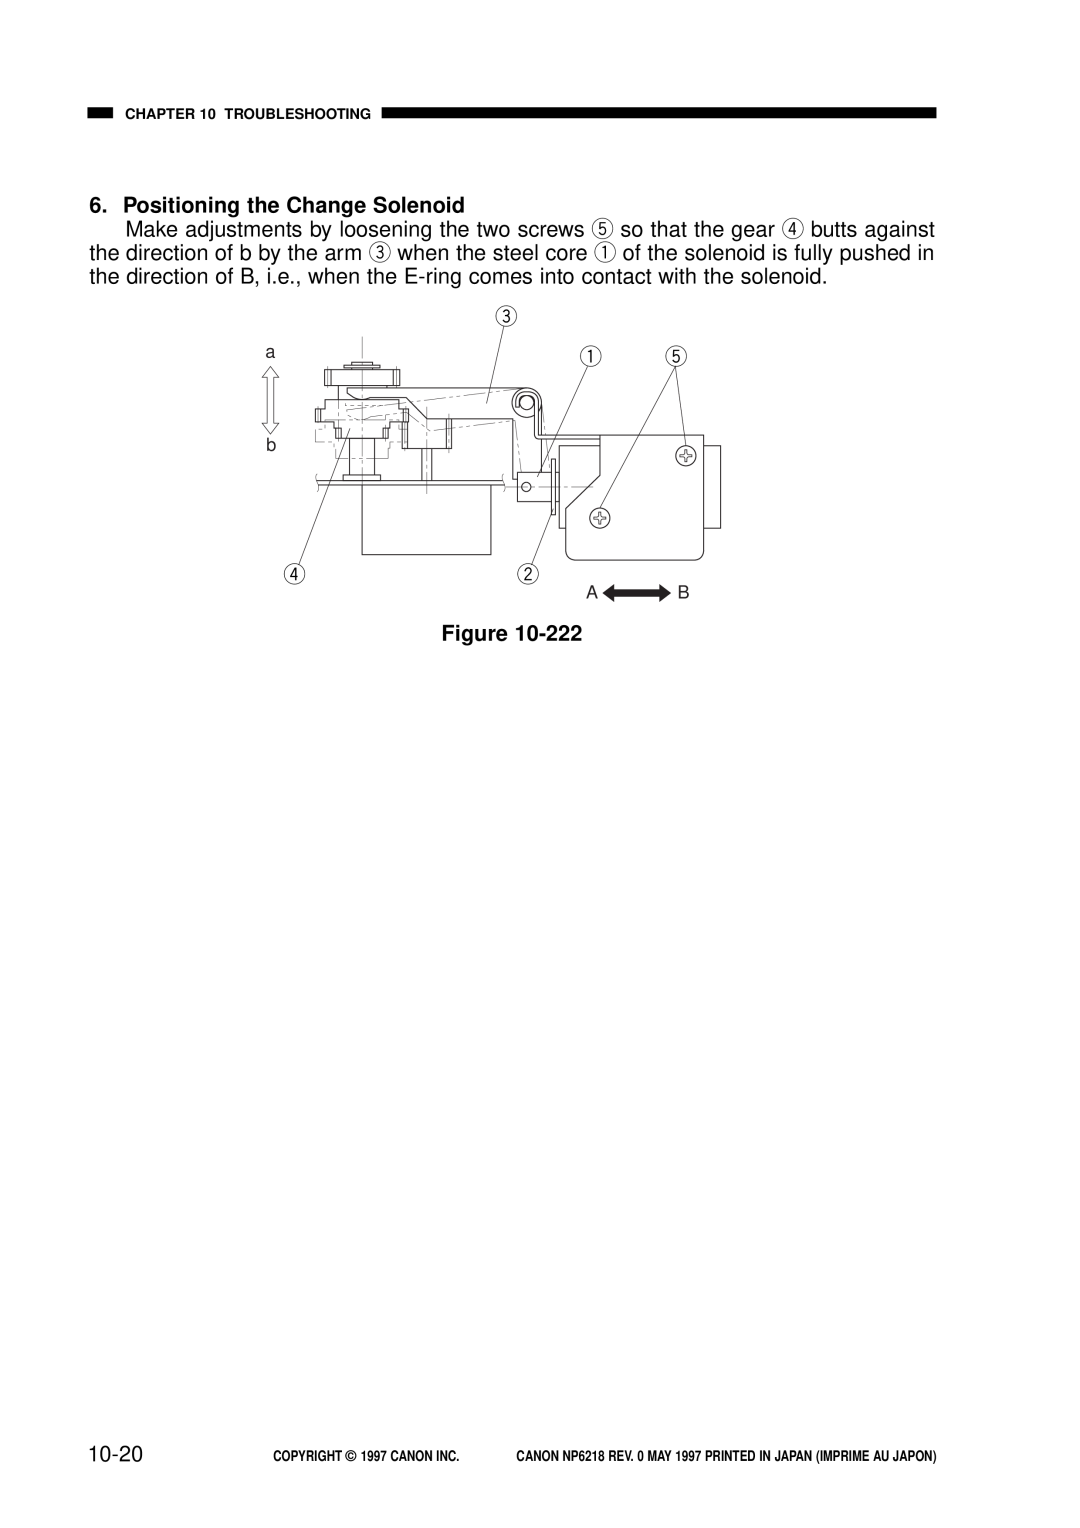 Canon NP6218, FY8-13EX-000 service manual Positioning the Change Solenoid, 10-20 